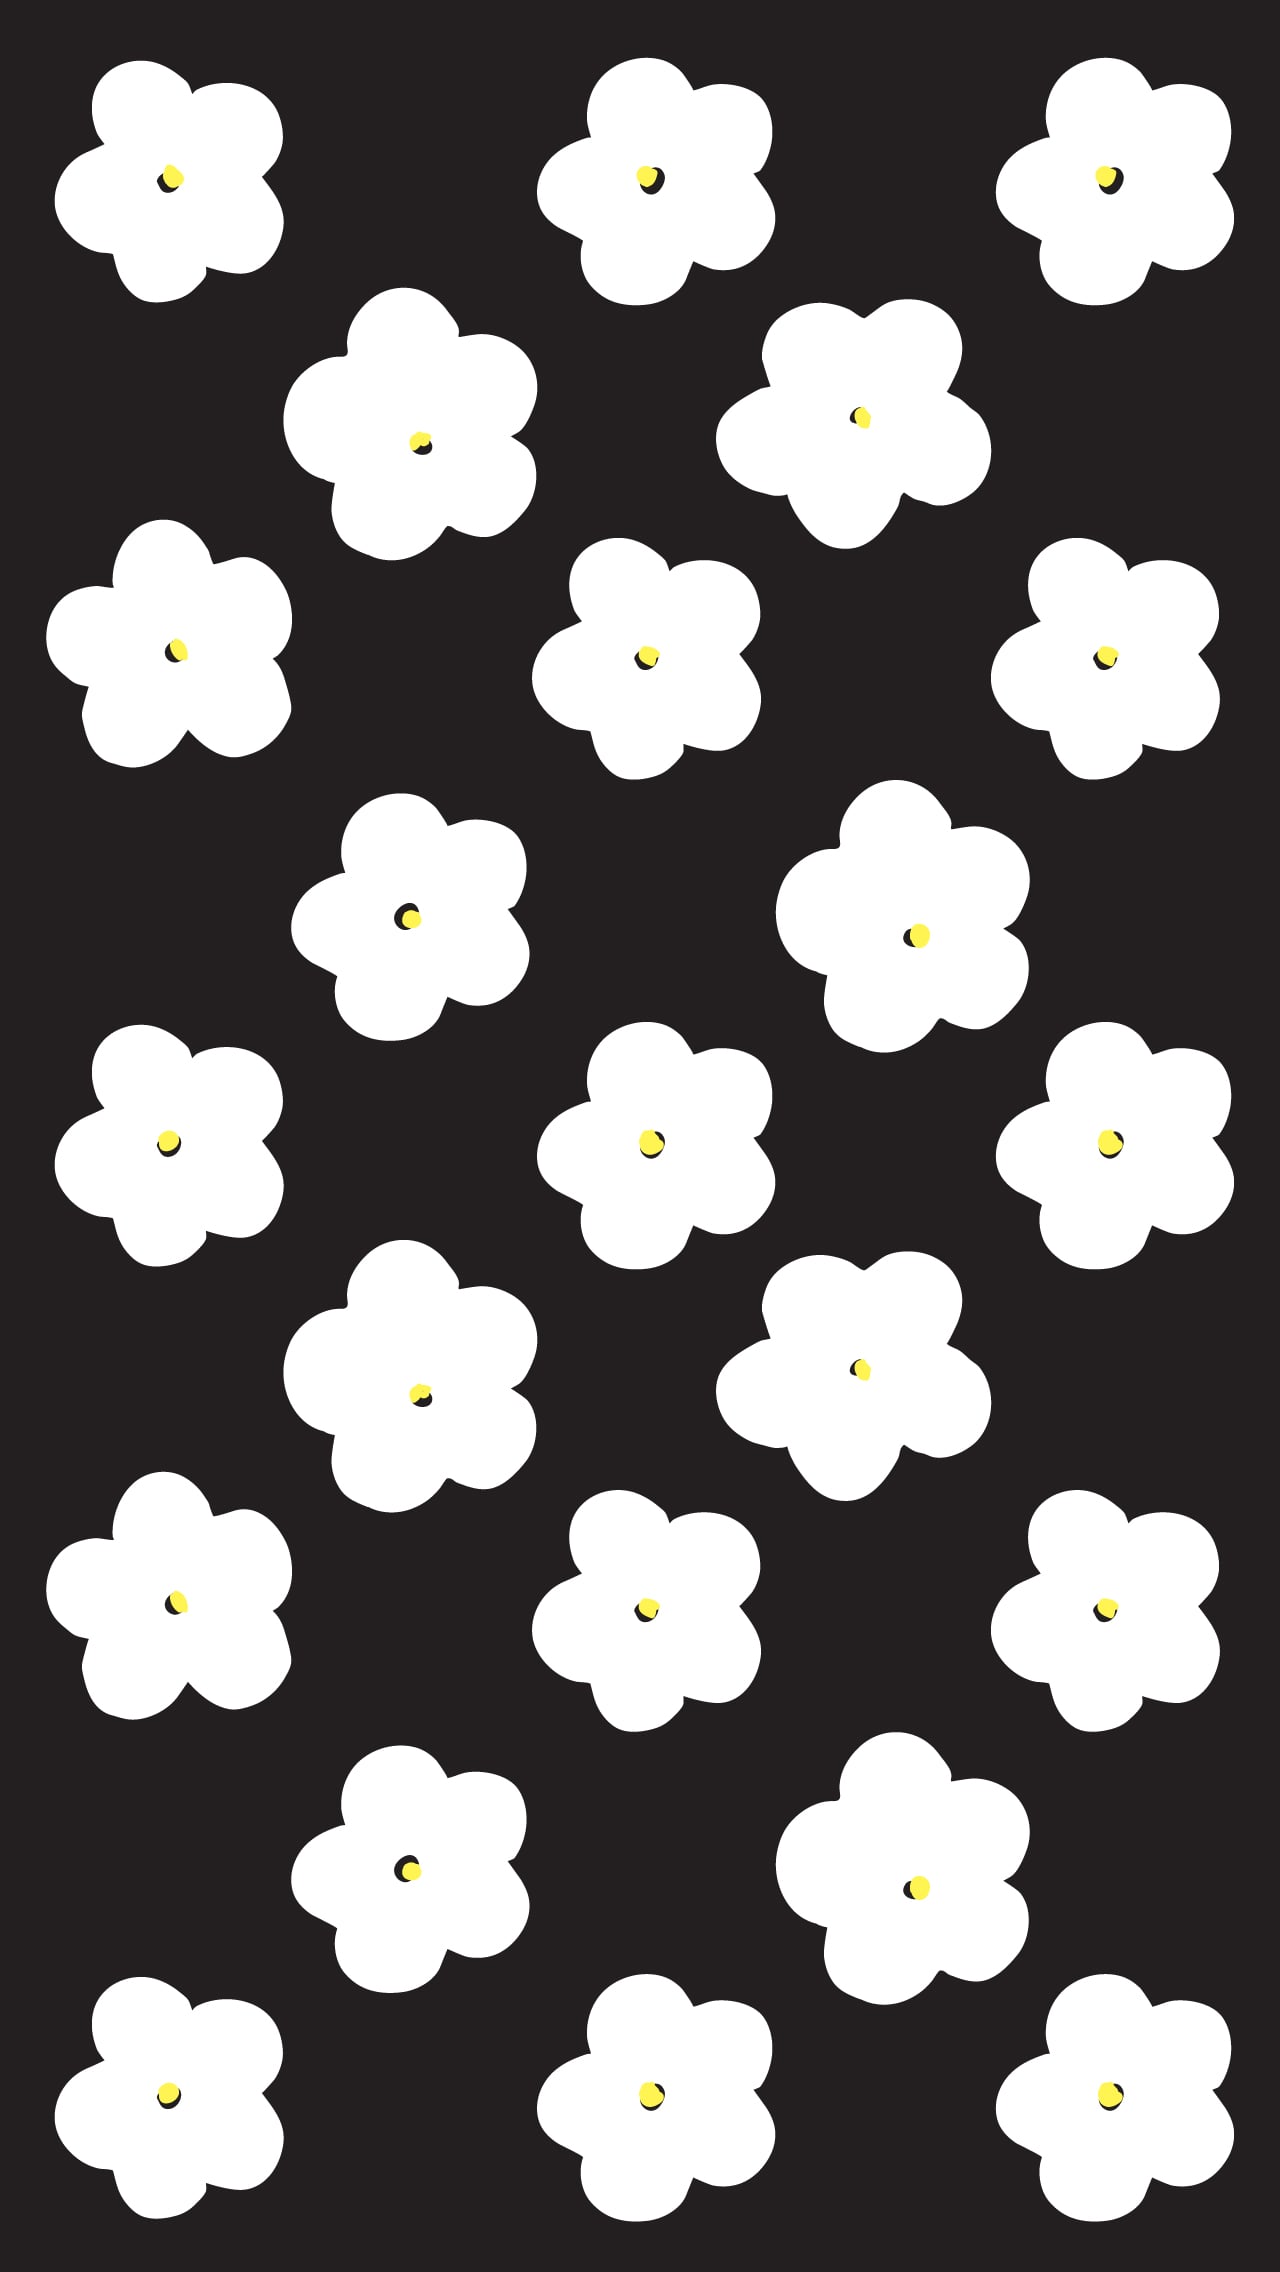 Black and White Flowers Free and Fun iPhone Wallpaper to Liven Up Your Life